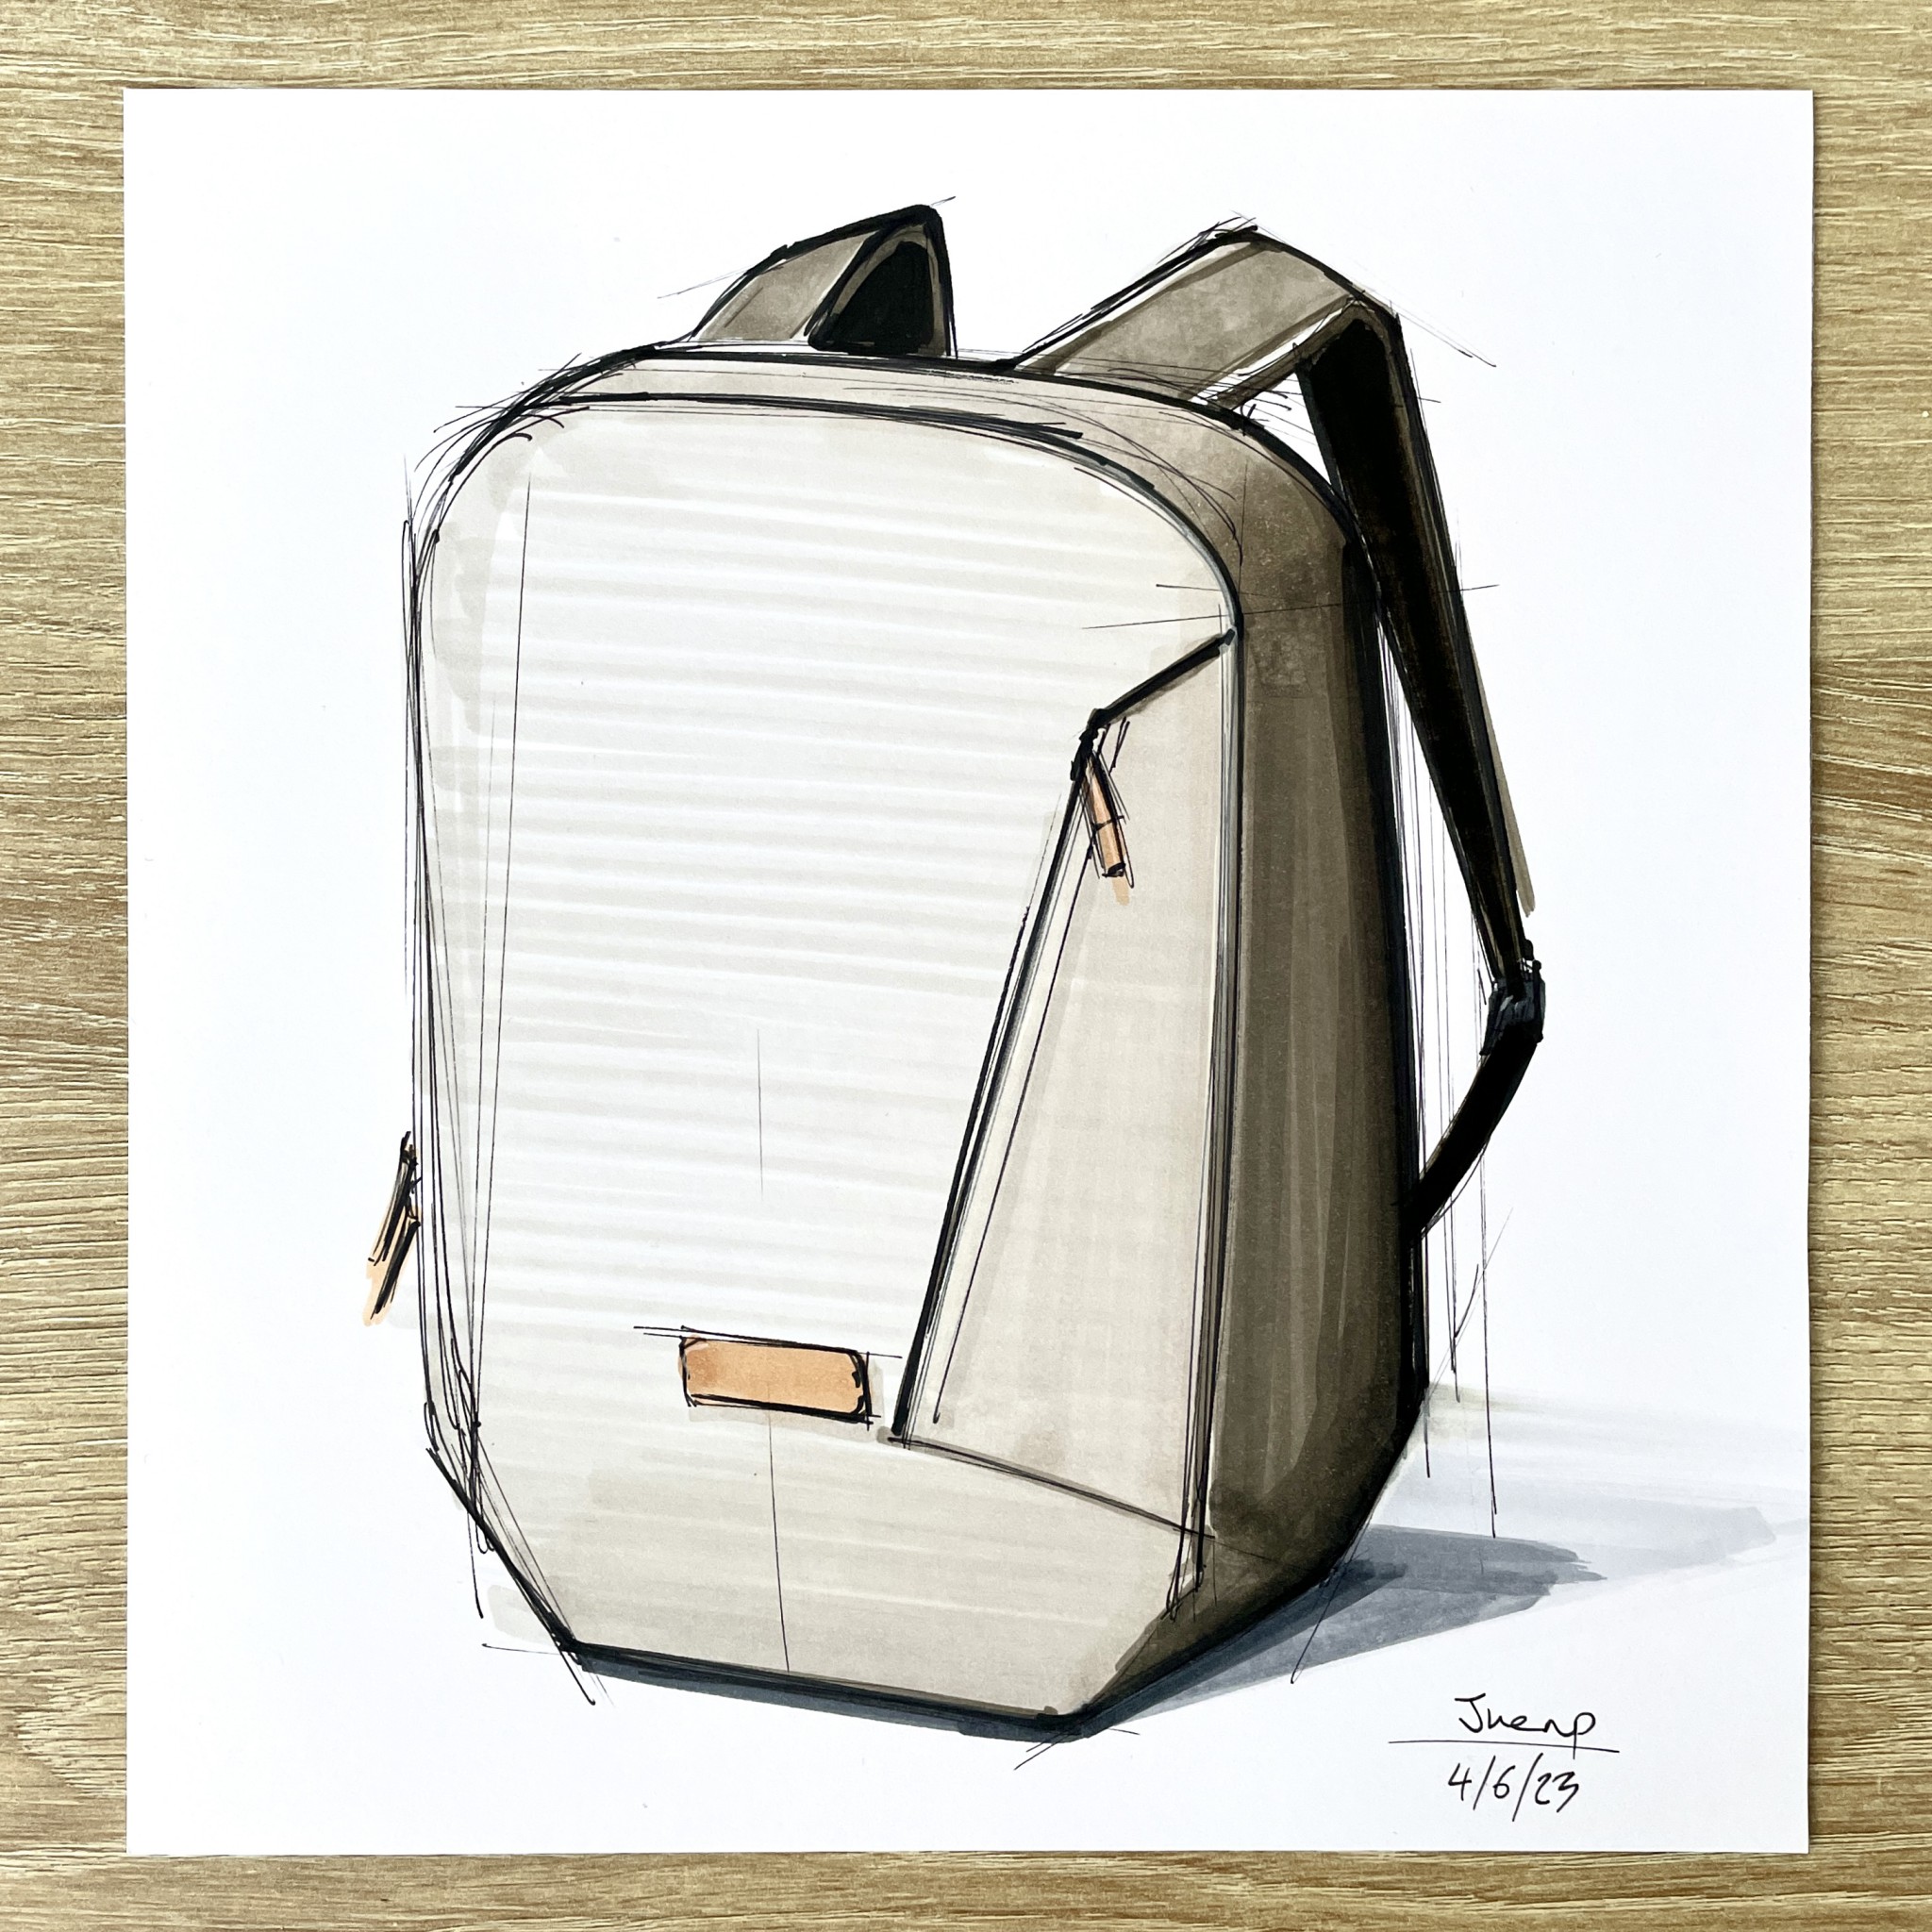 13311 Backpack Line Drawing Images Stock Photos  Vectors  Shutterstock